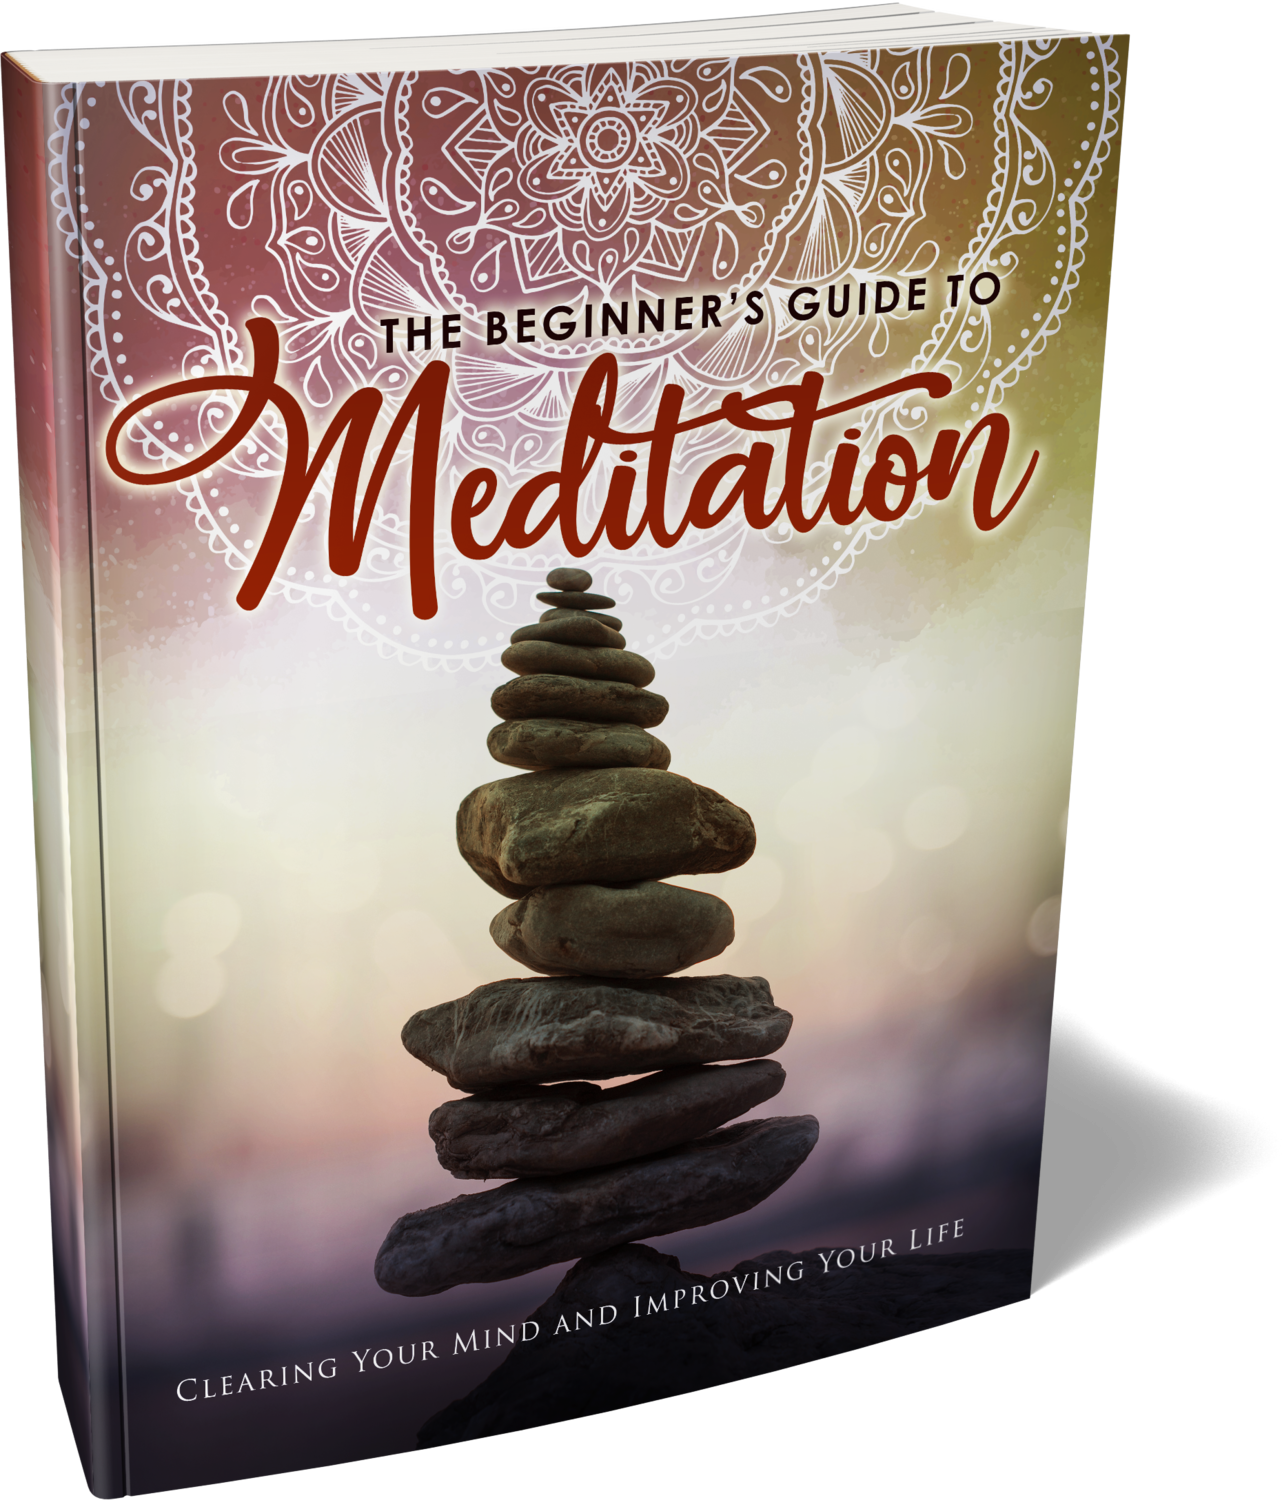 The Beginner's Guide To Meditation eBook